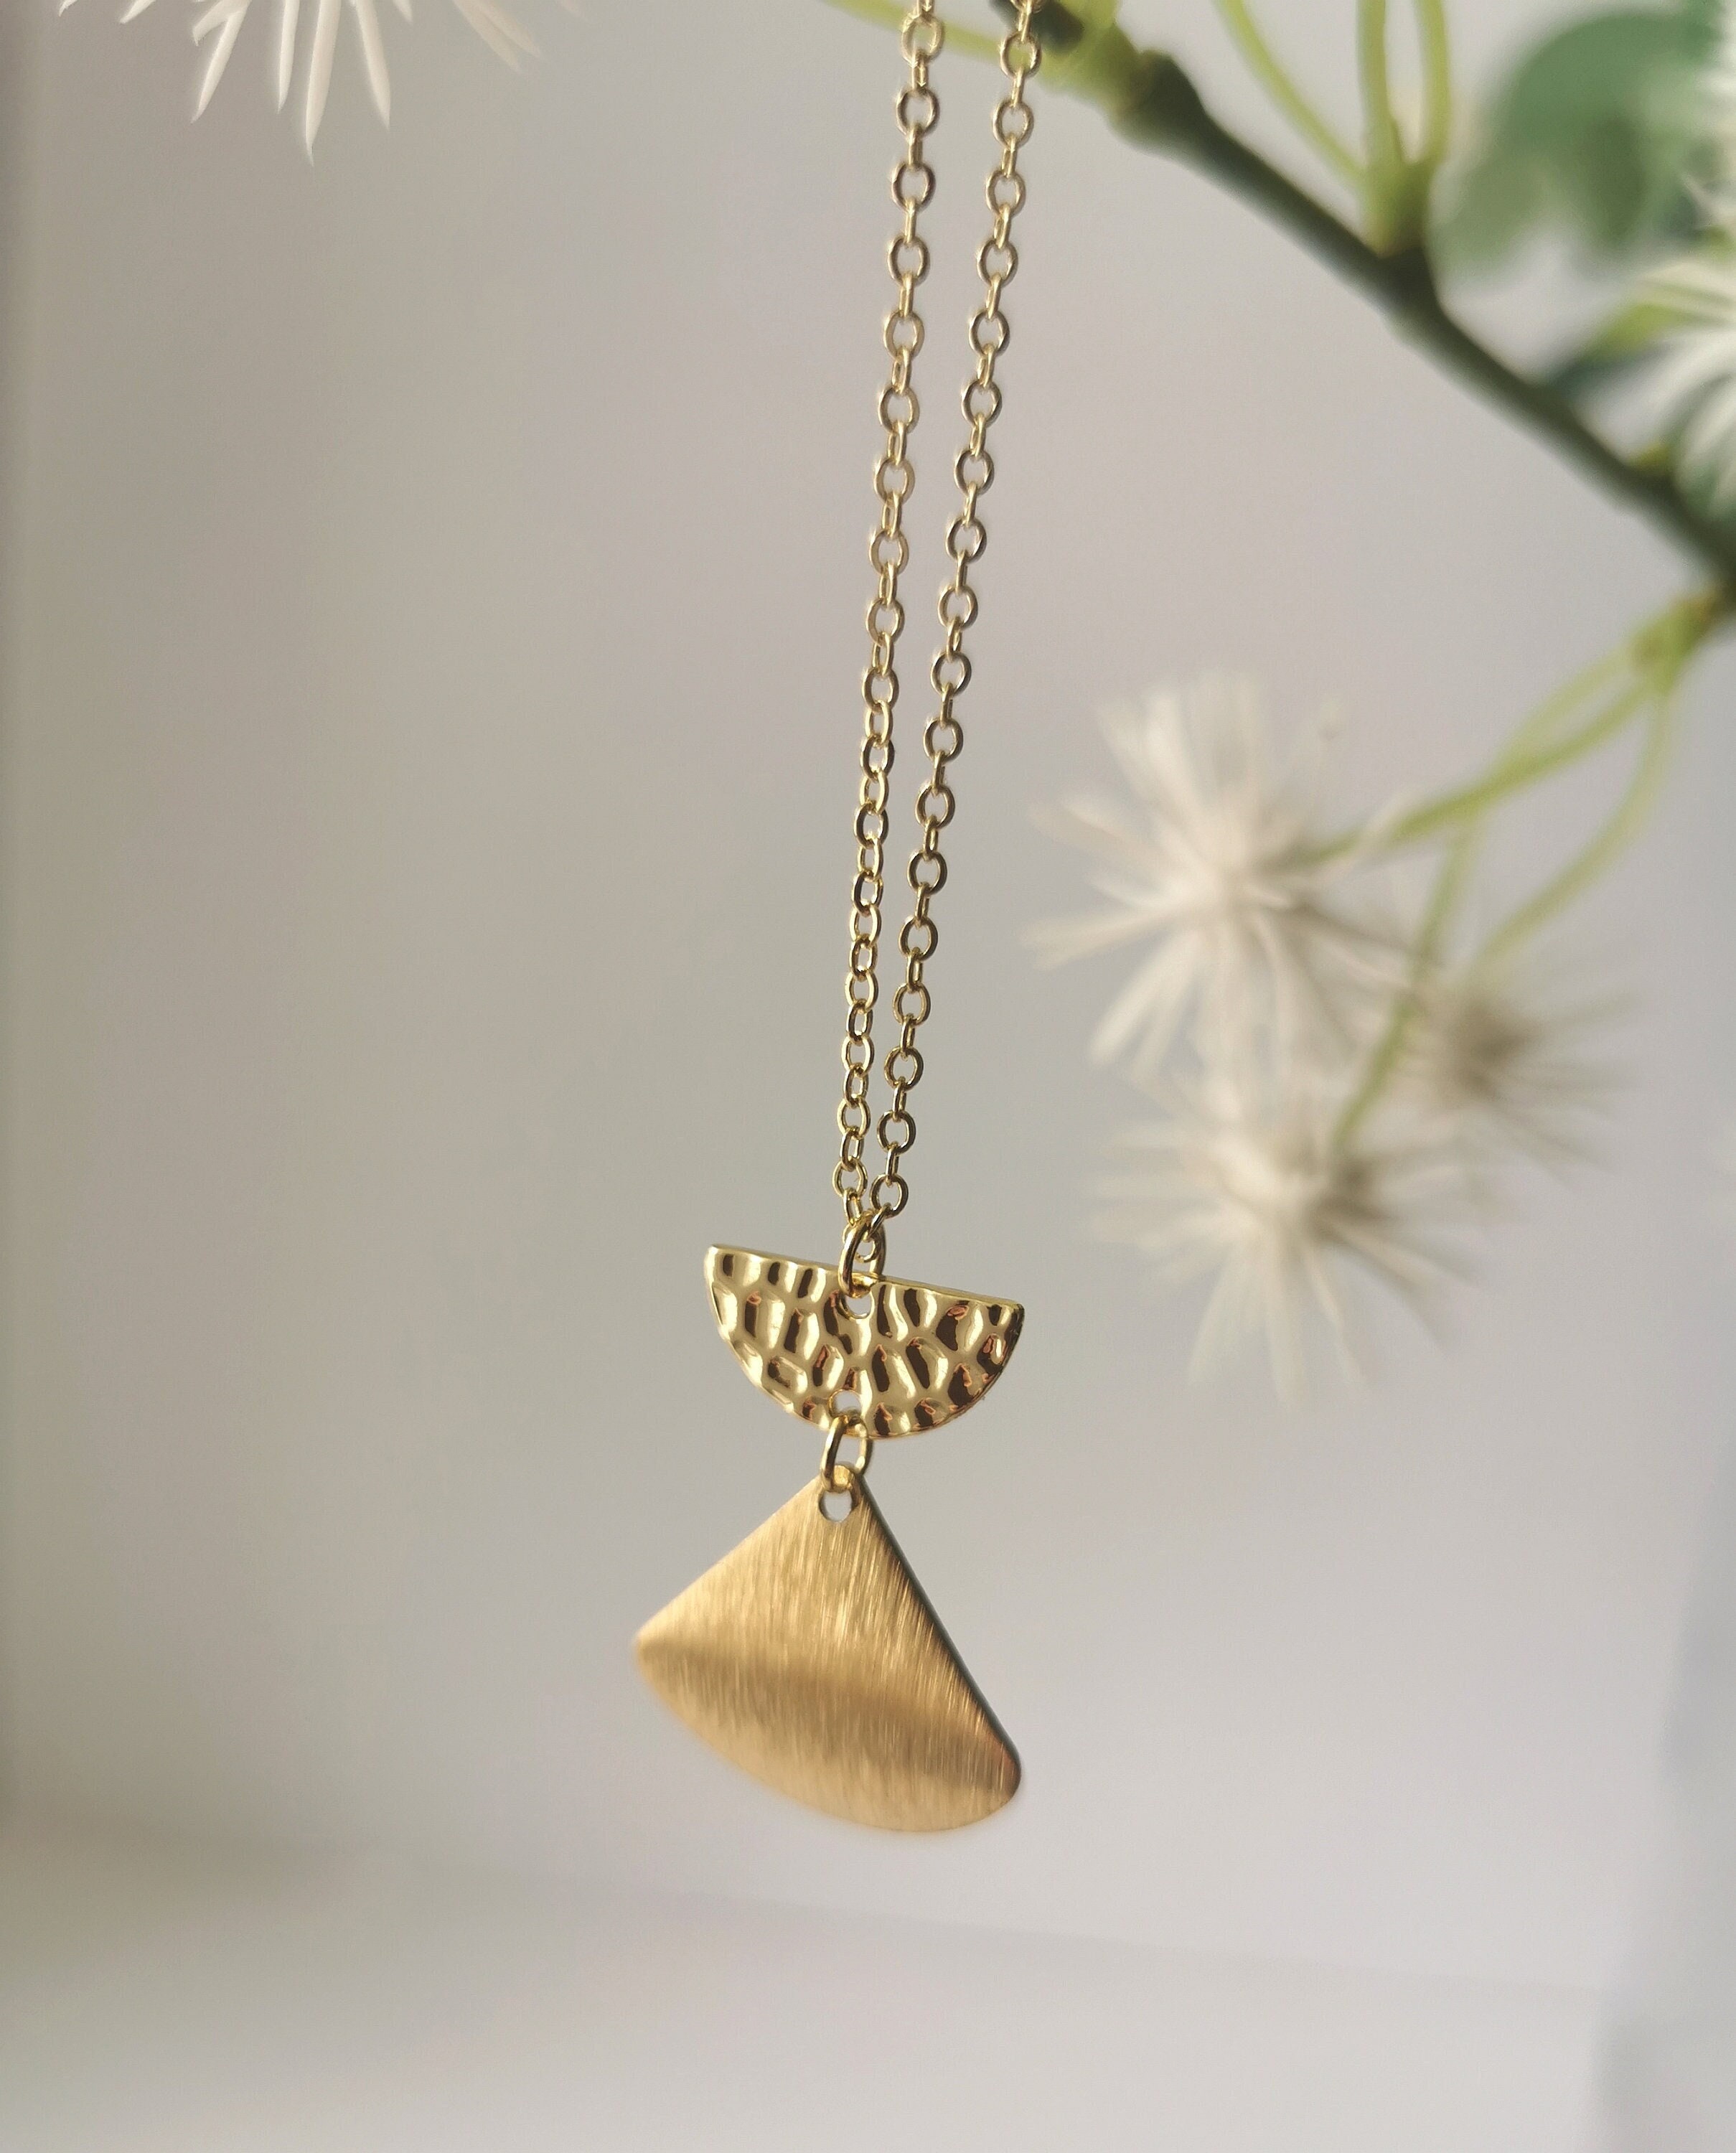 Geometric Art Deco Inspired Necklace With Half Moon Textured Brass & Curved Fan Charm On A Gold Plated Fine Chain